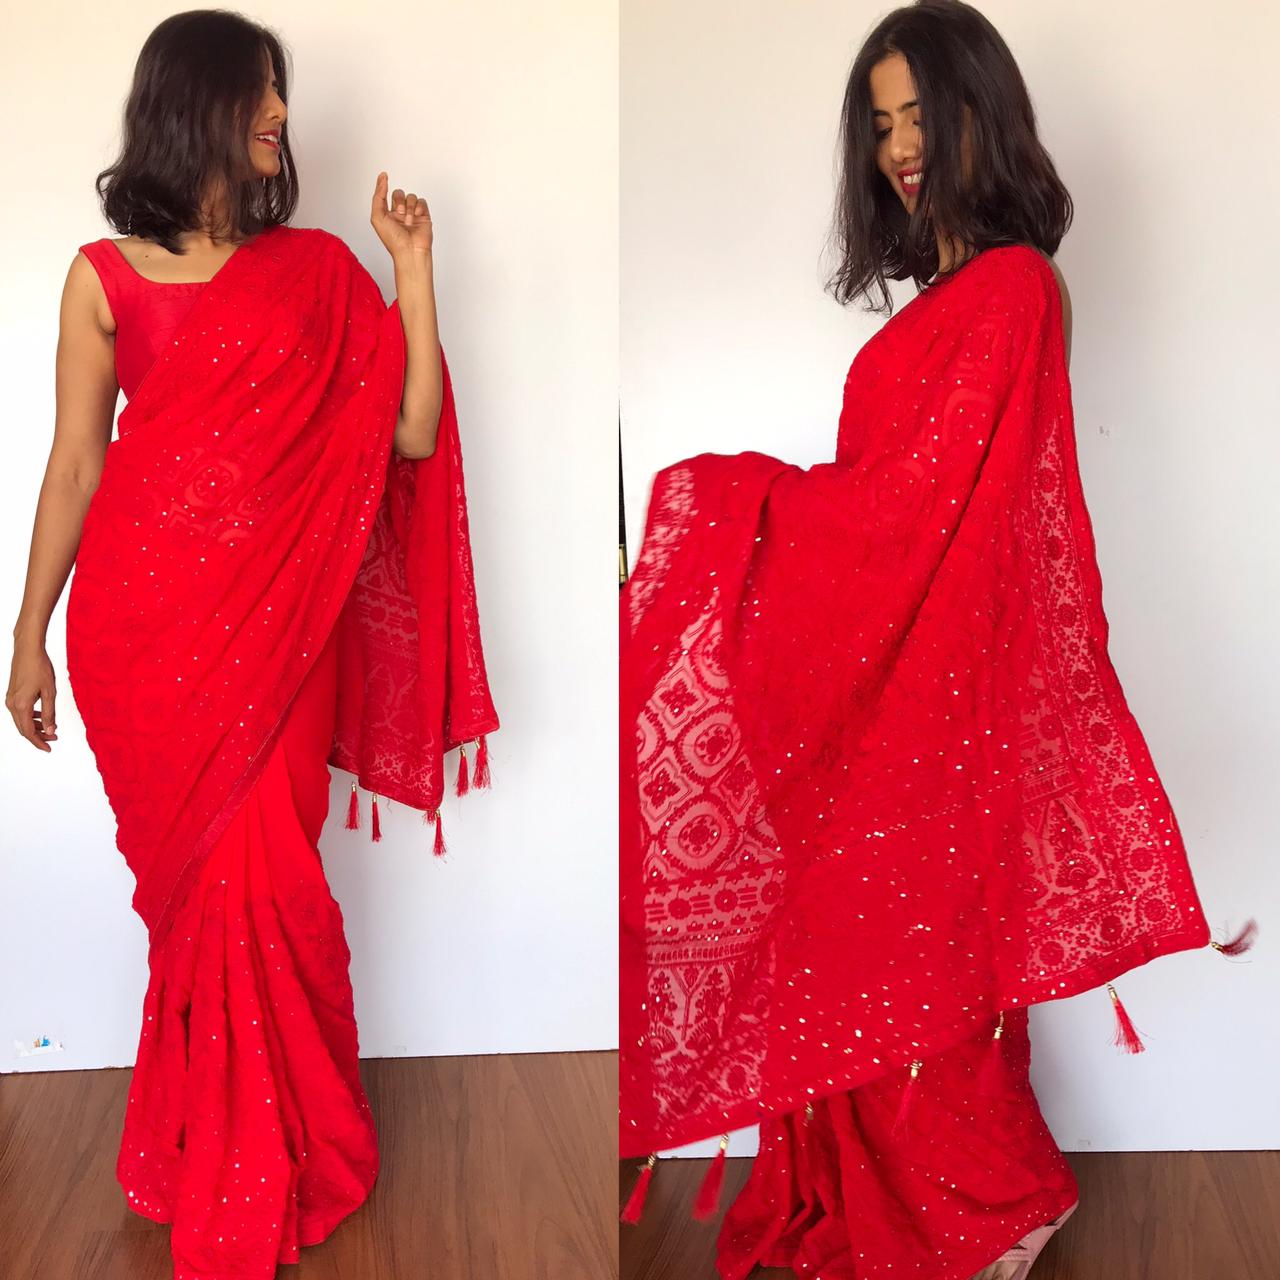 Here Are 12 Daily Wear Sarees for Your Trousseau?